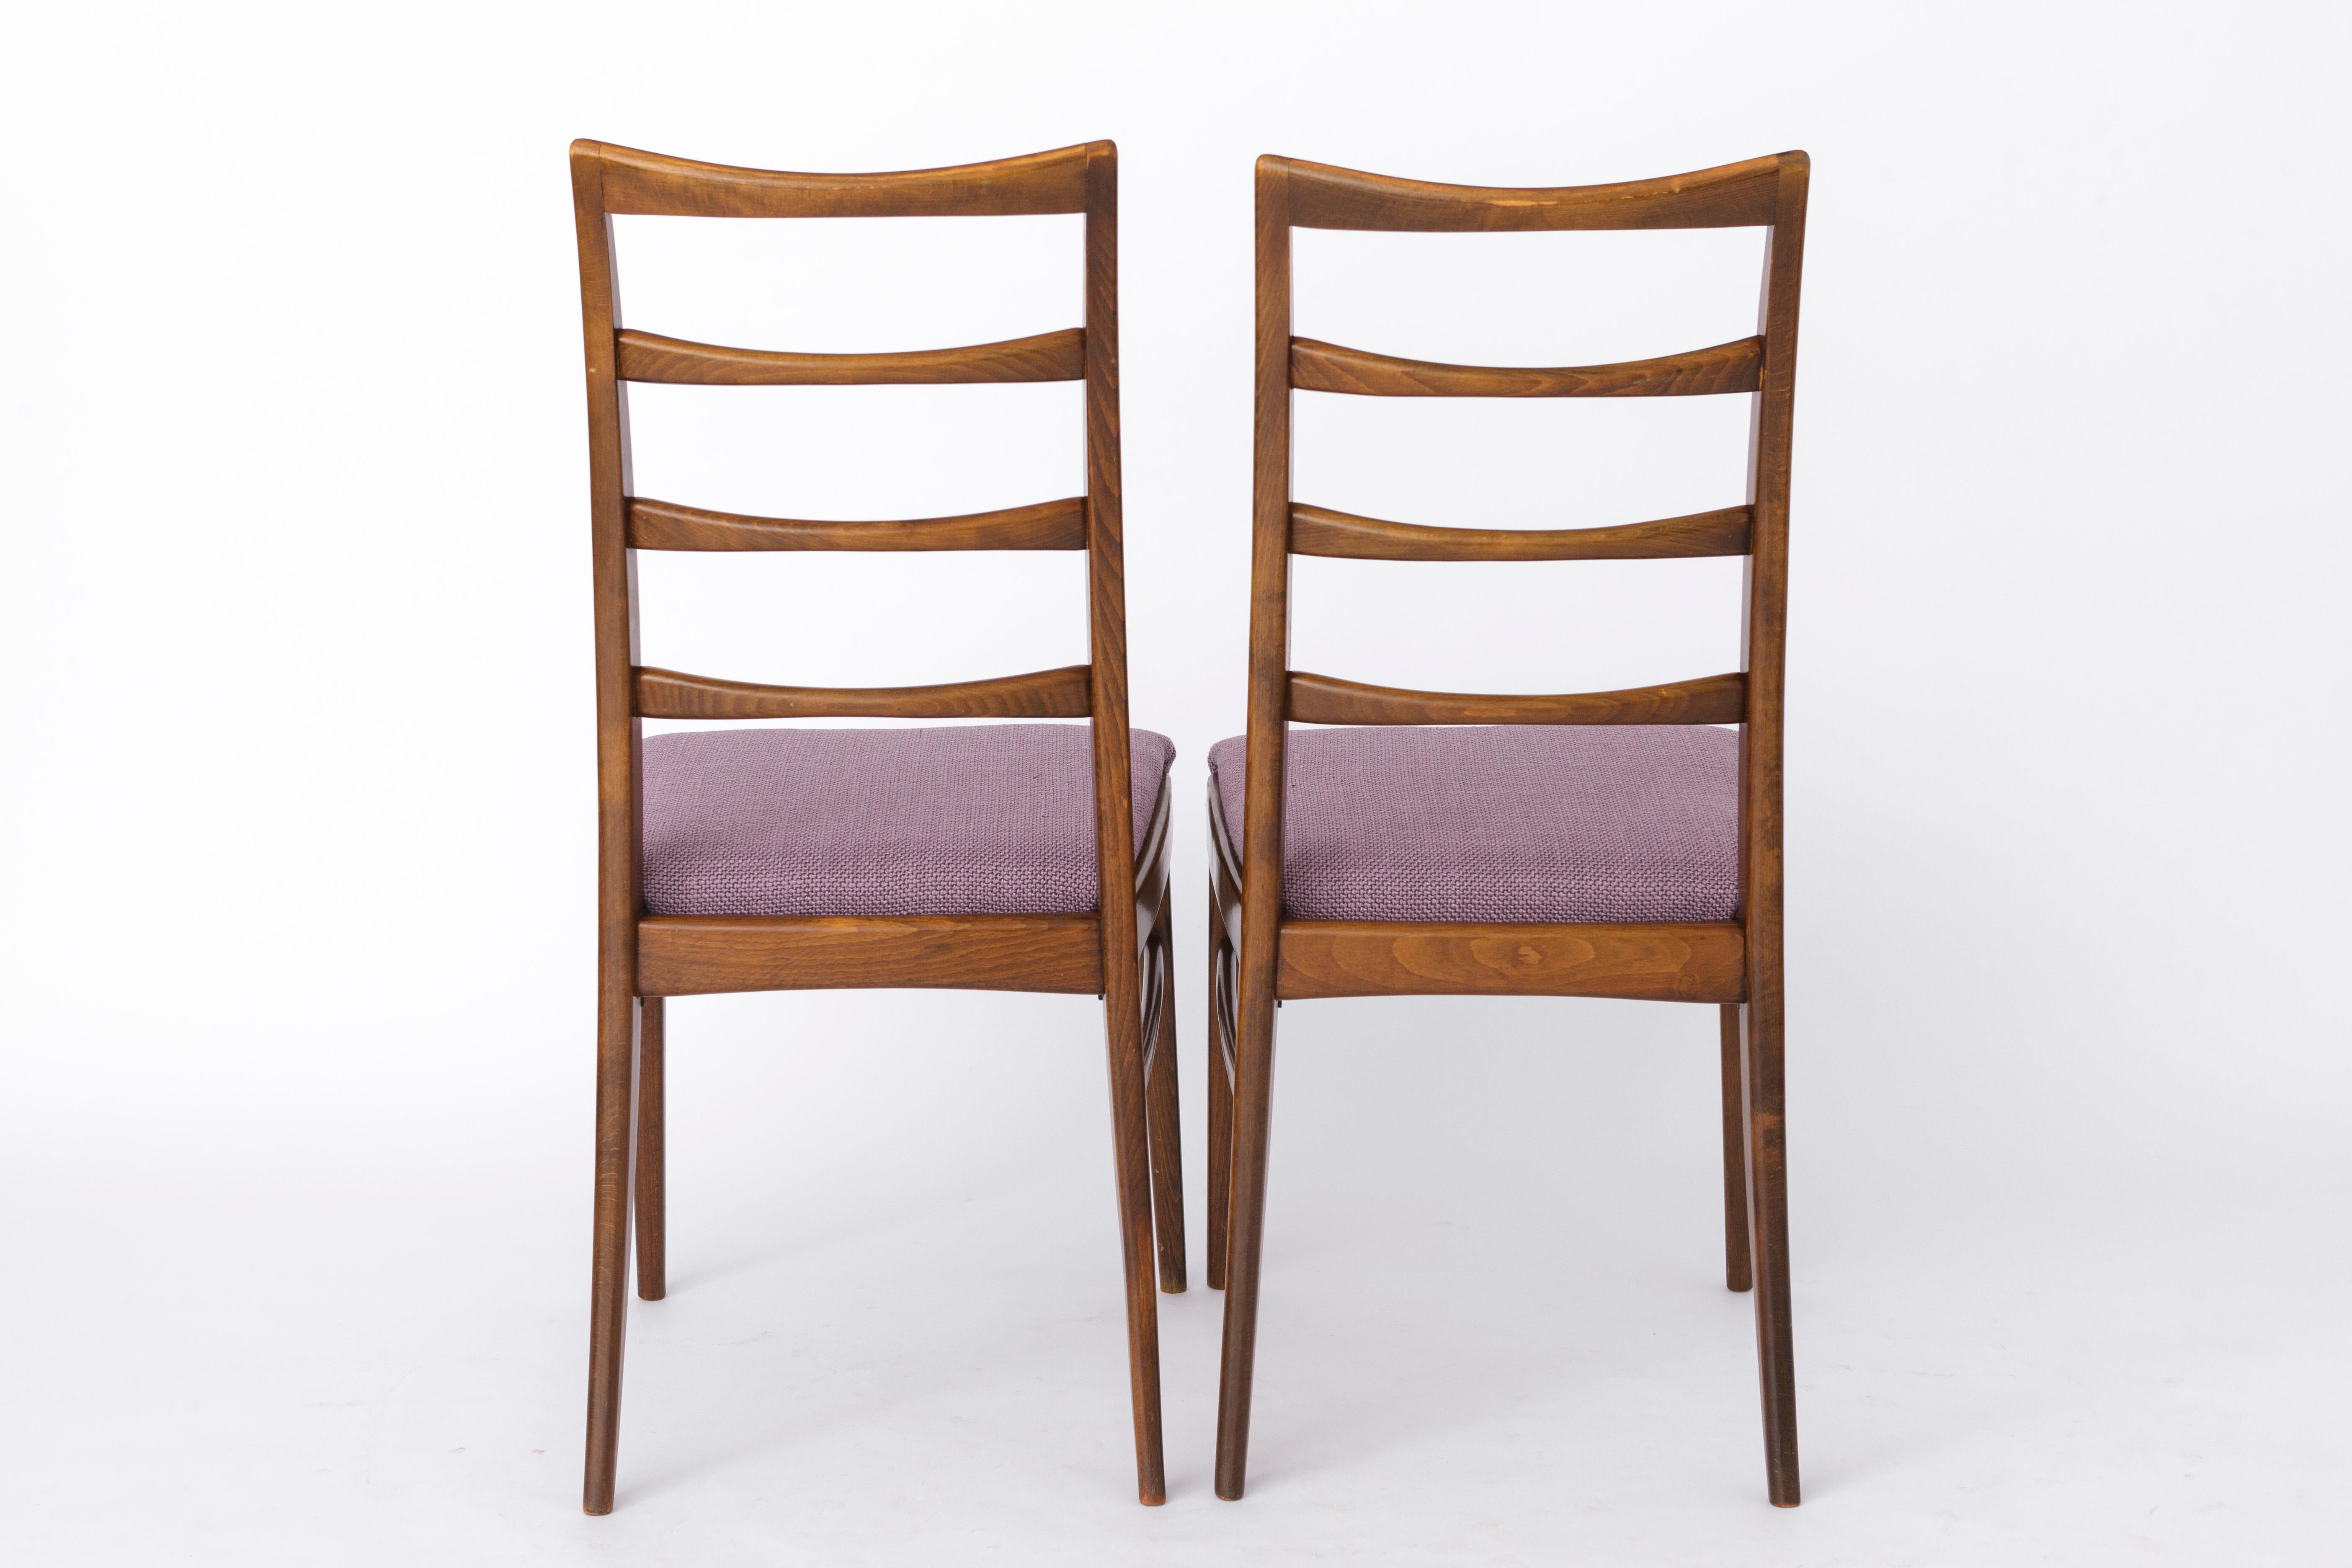 Teak 2 of 6 Midcentury chairs, 1950s-1960s, Germany For Sale